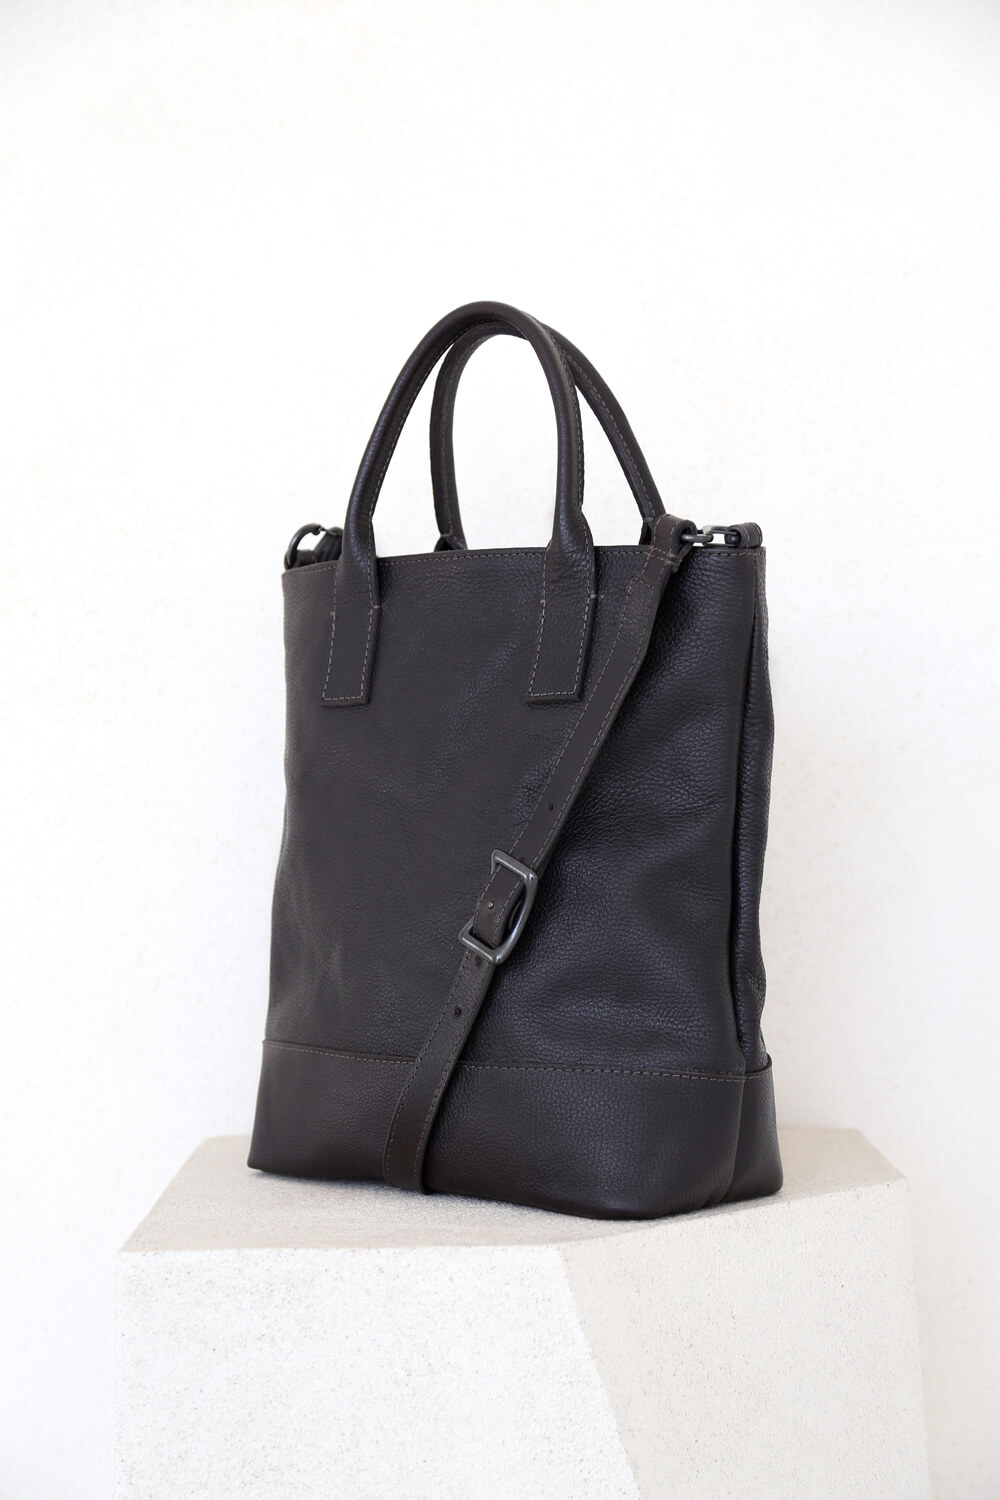 V Tote Bison - Corîu - Leather Bags